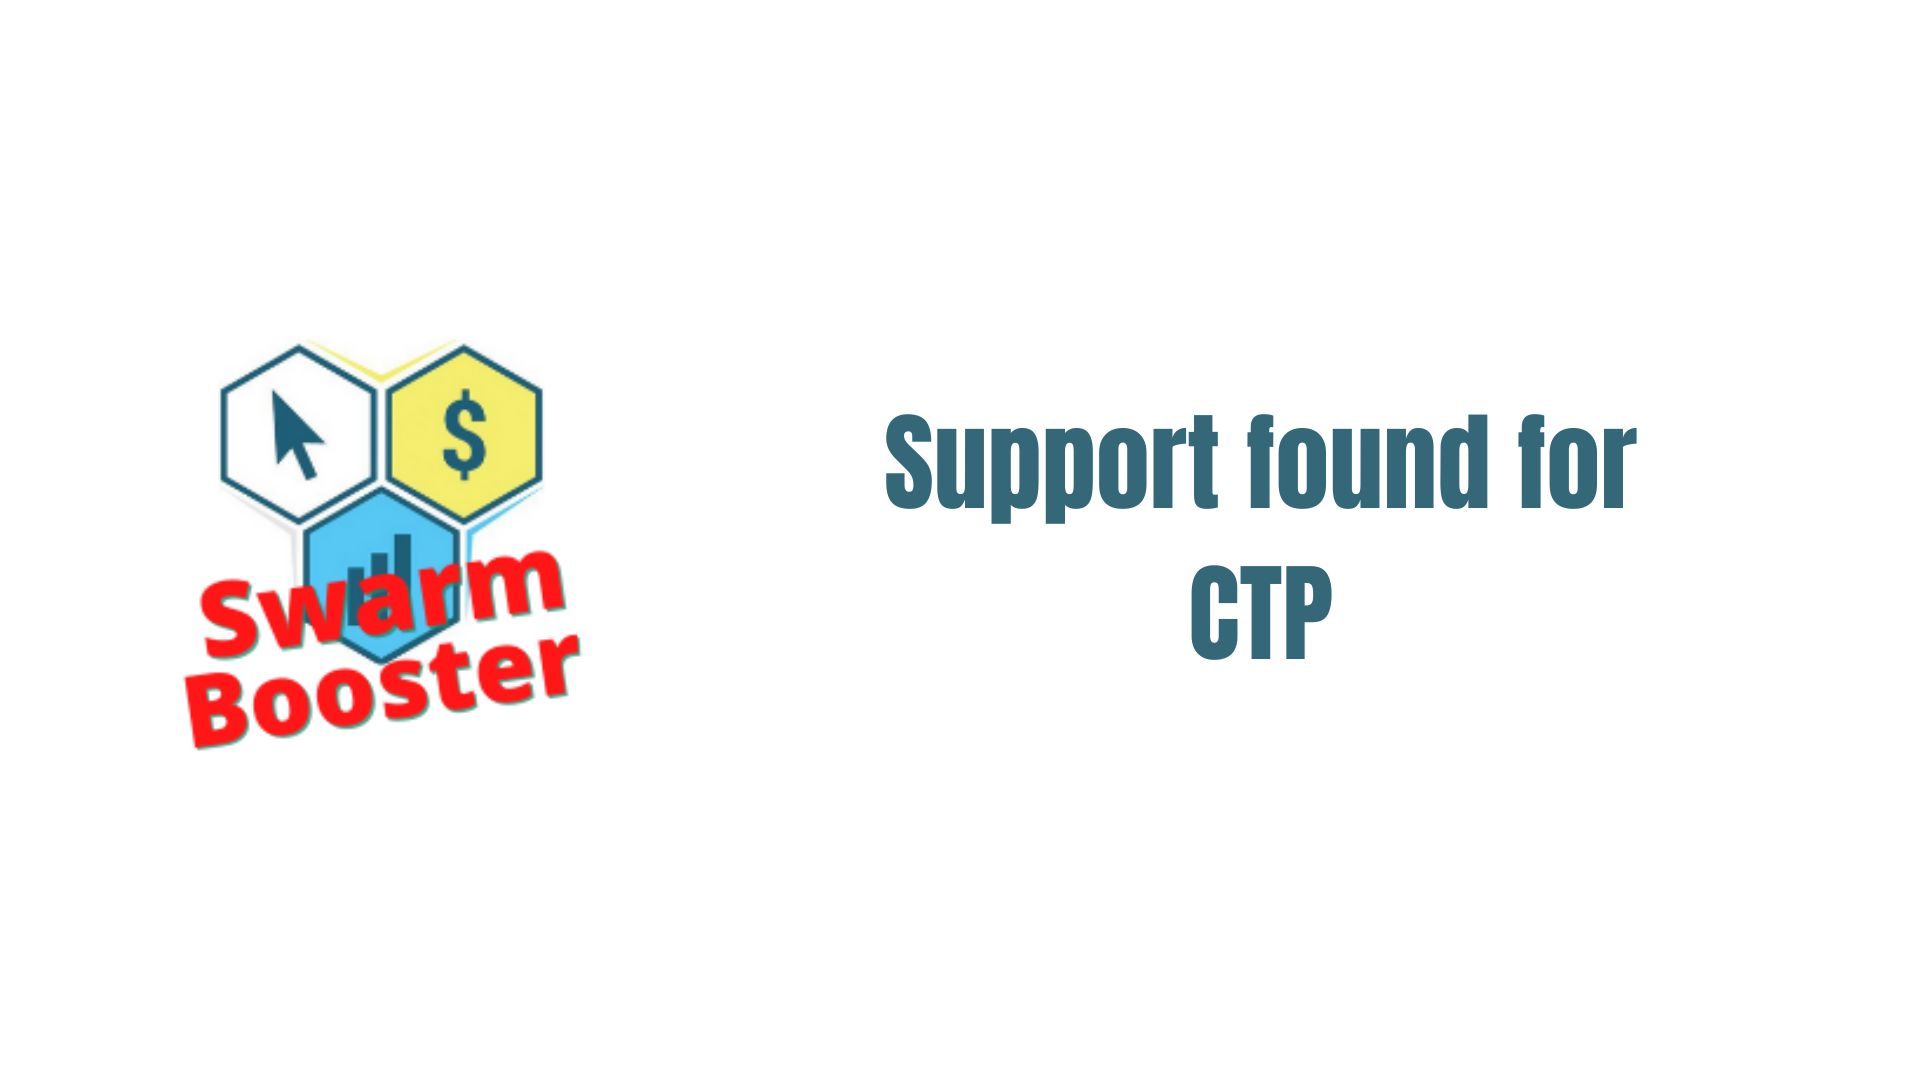 Support found for CTP.jpg